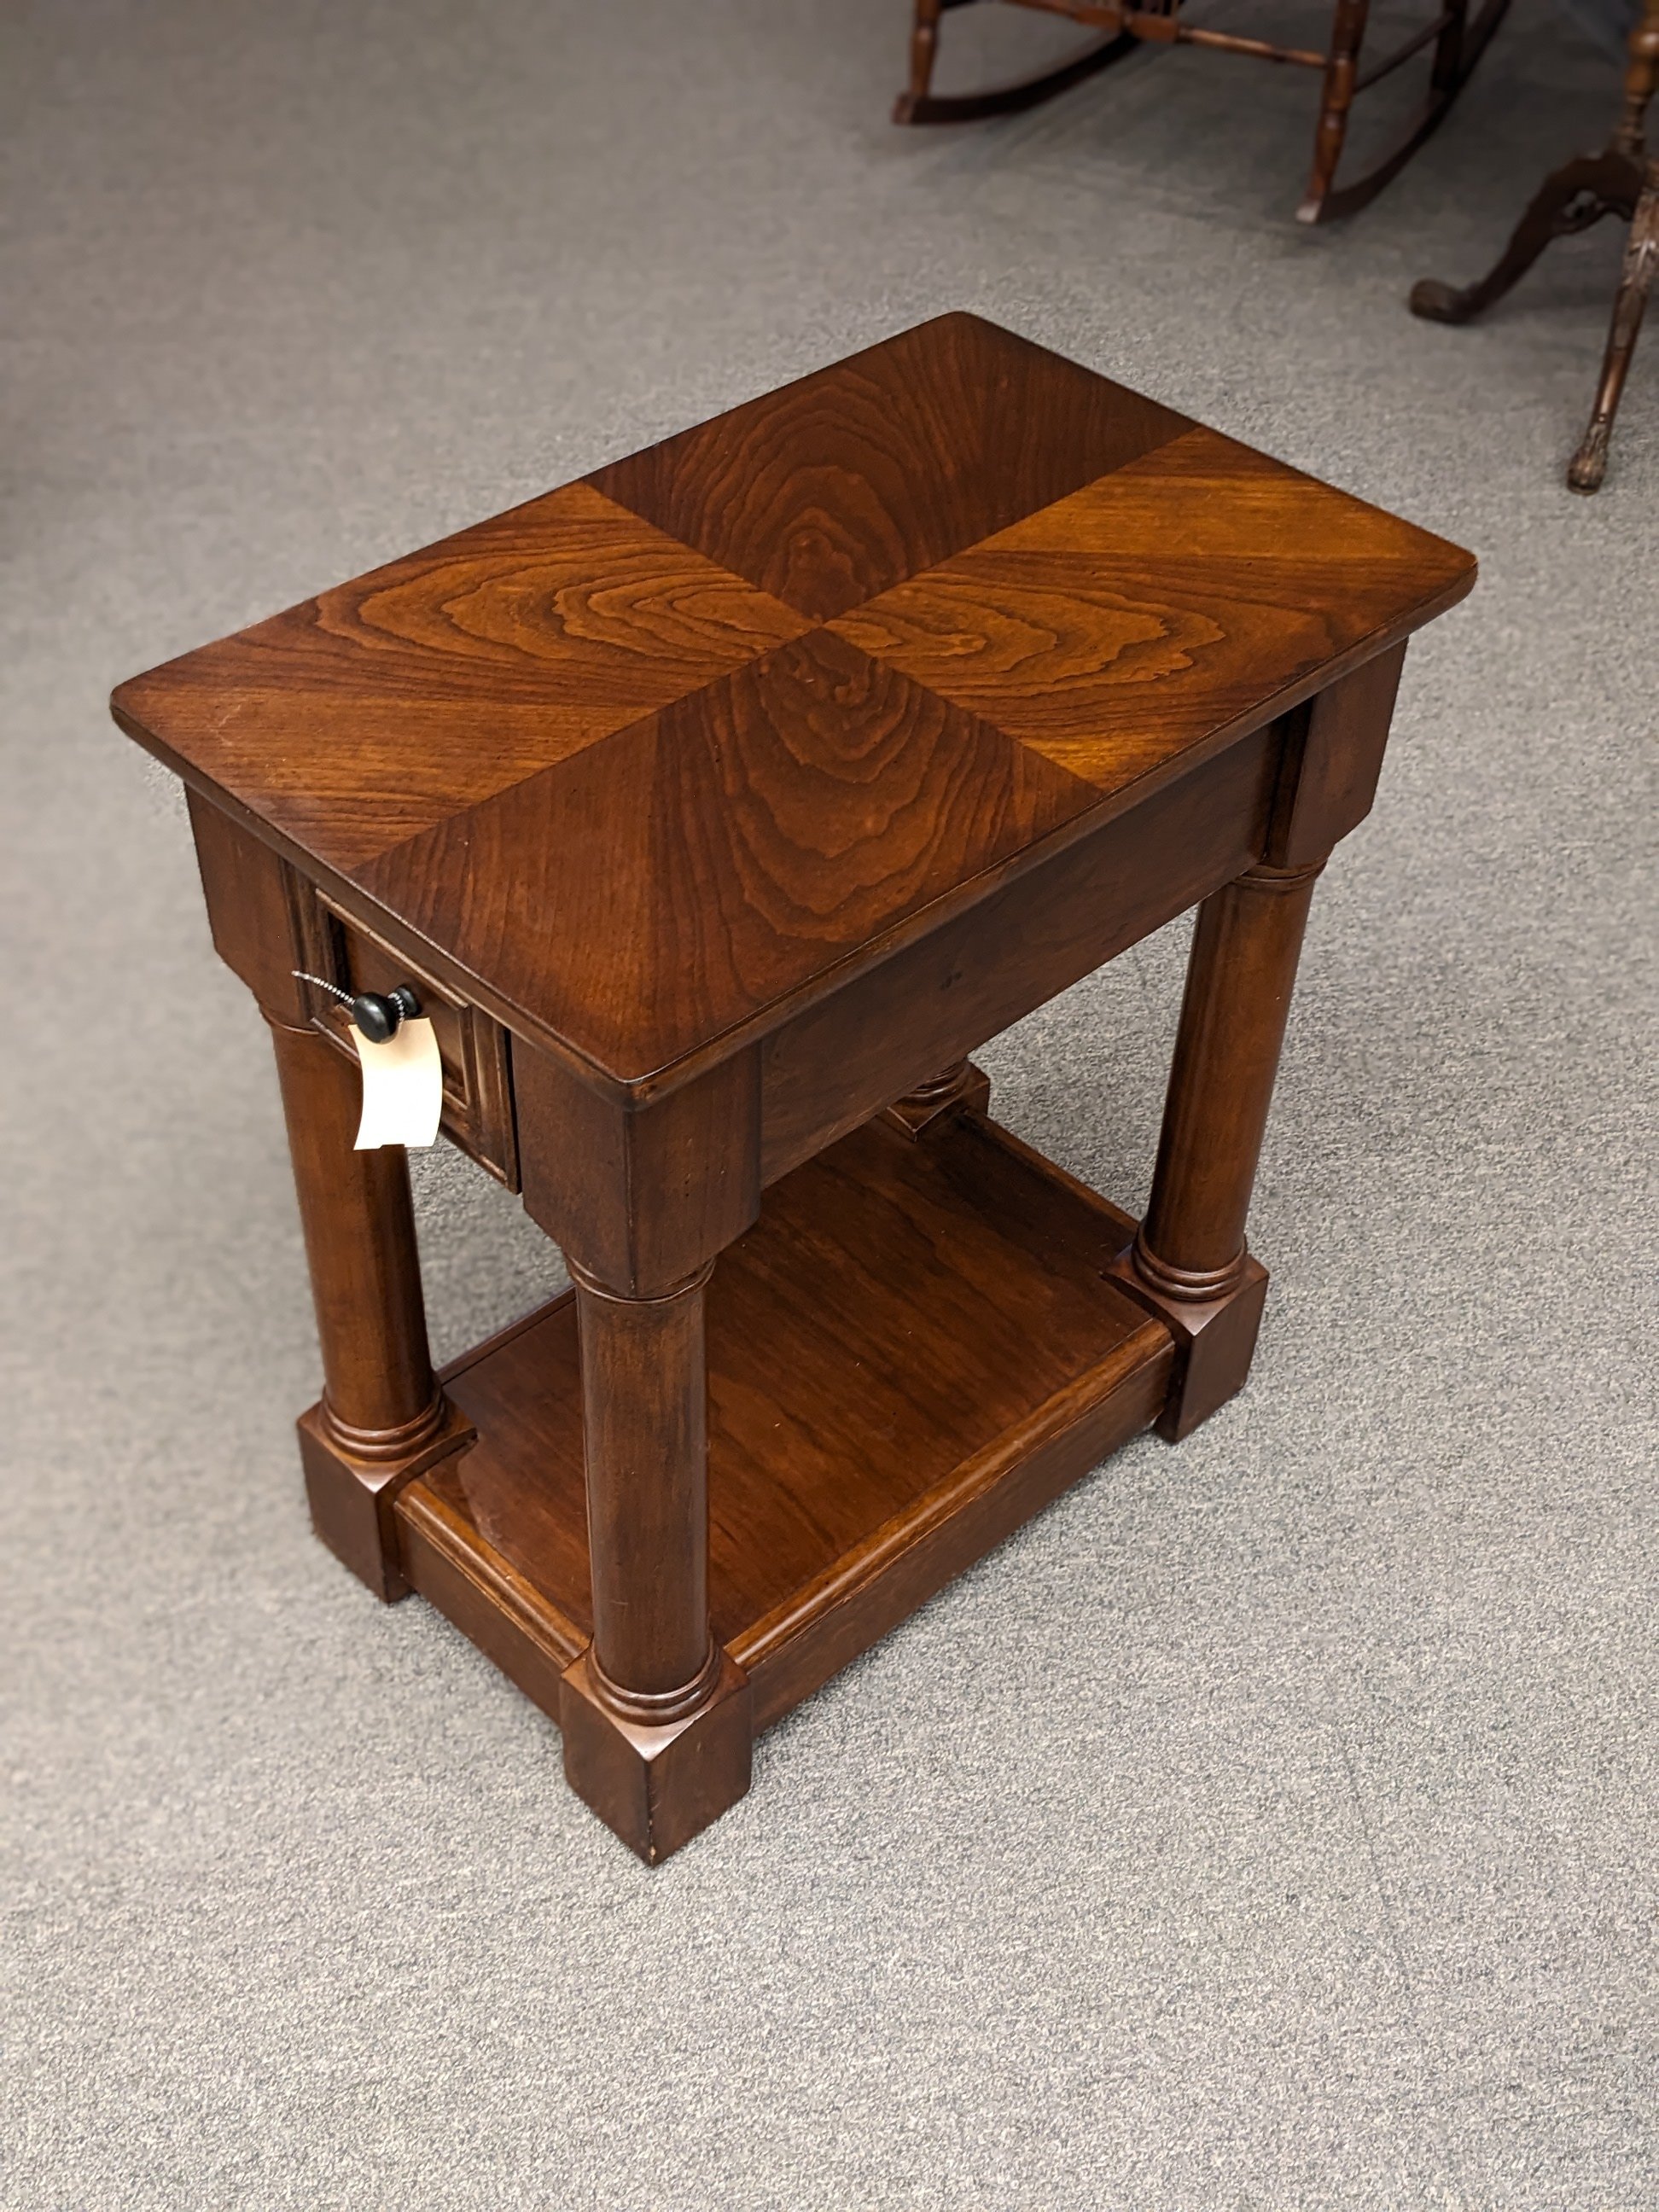 Dovetailed Chairside End Table